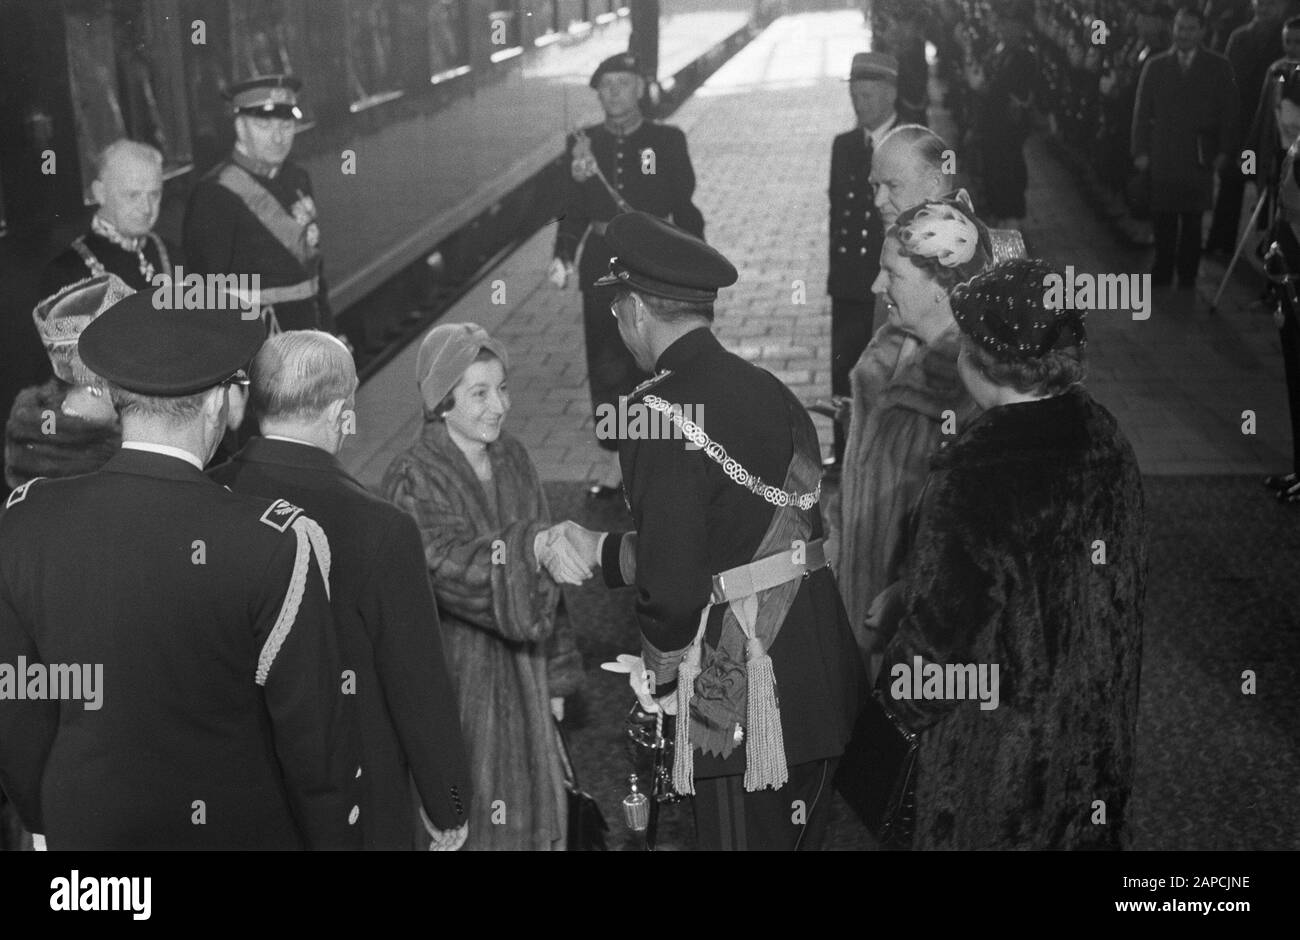 Arrival of President of Peru dr. Manuel Prado and her wife Mrs. Clorinda  Malaga Prado at the station in The Hague Date: March 7, 1960 Location: The  Hague, Peru Keywords: ARRATRINA, Wife,